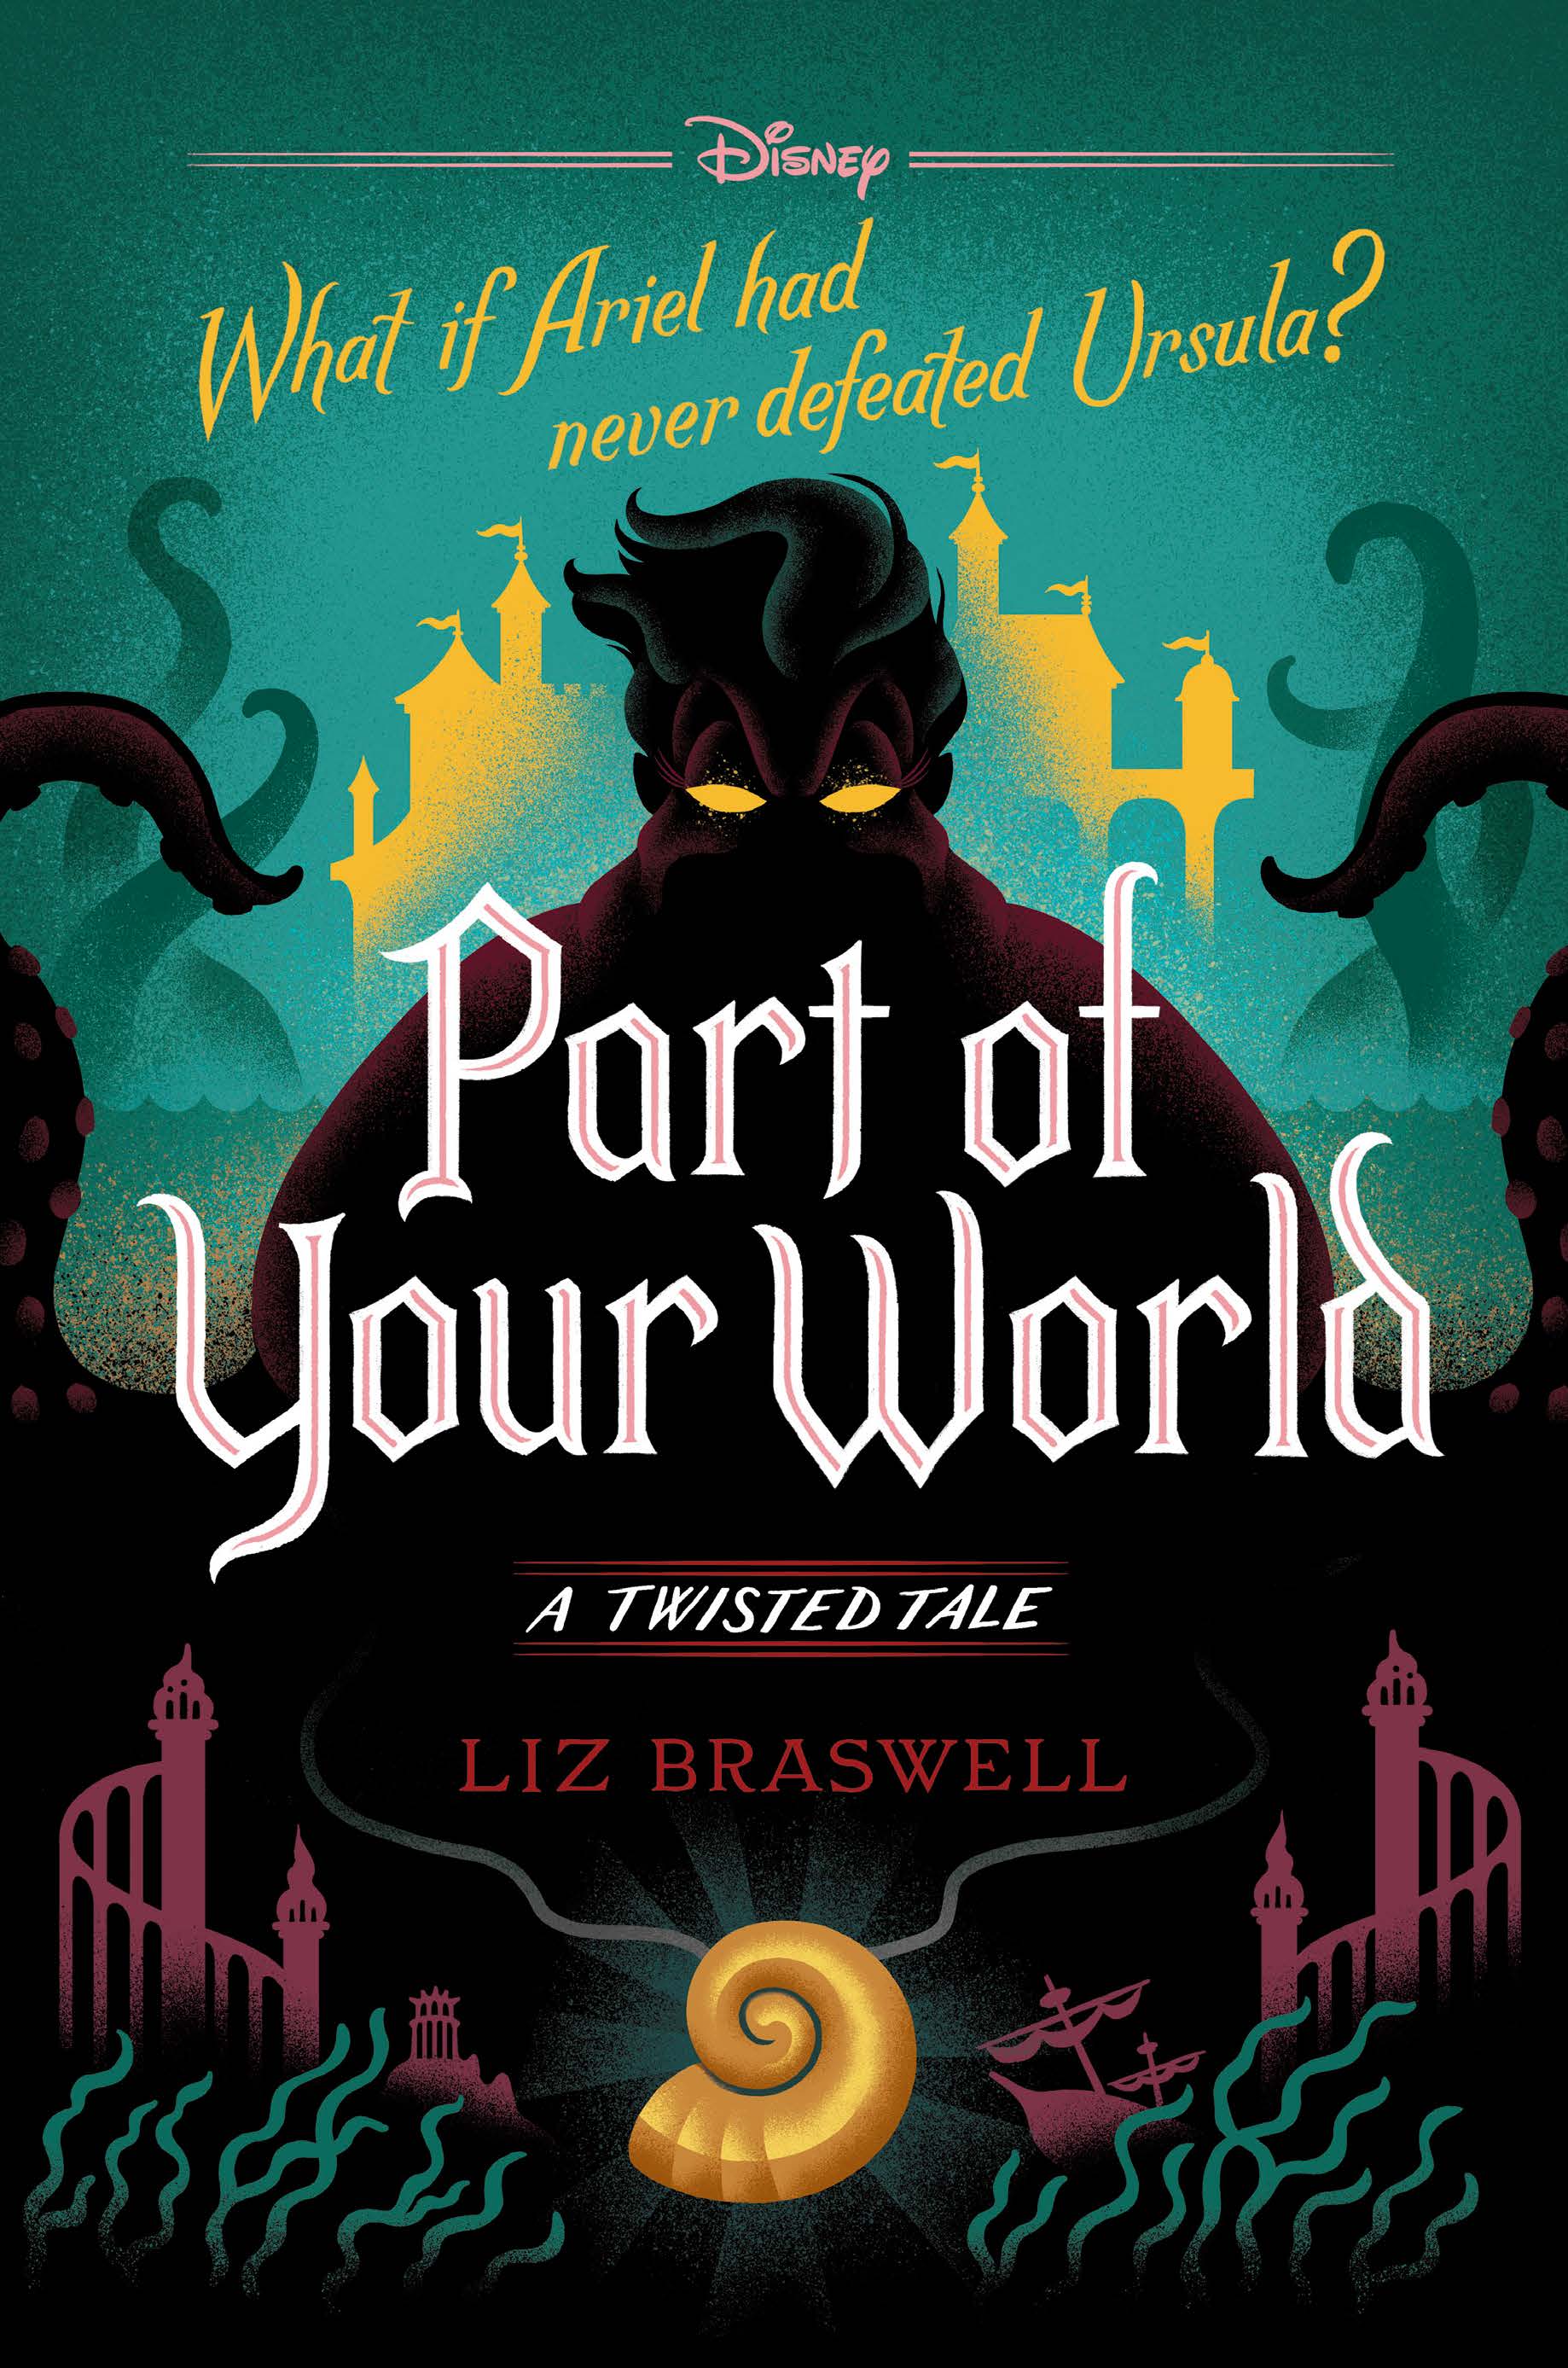 Part Of Your World A Twisted Tale by Liz Braswell - A Twisted Tale